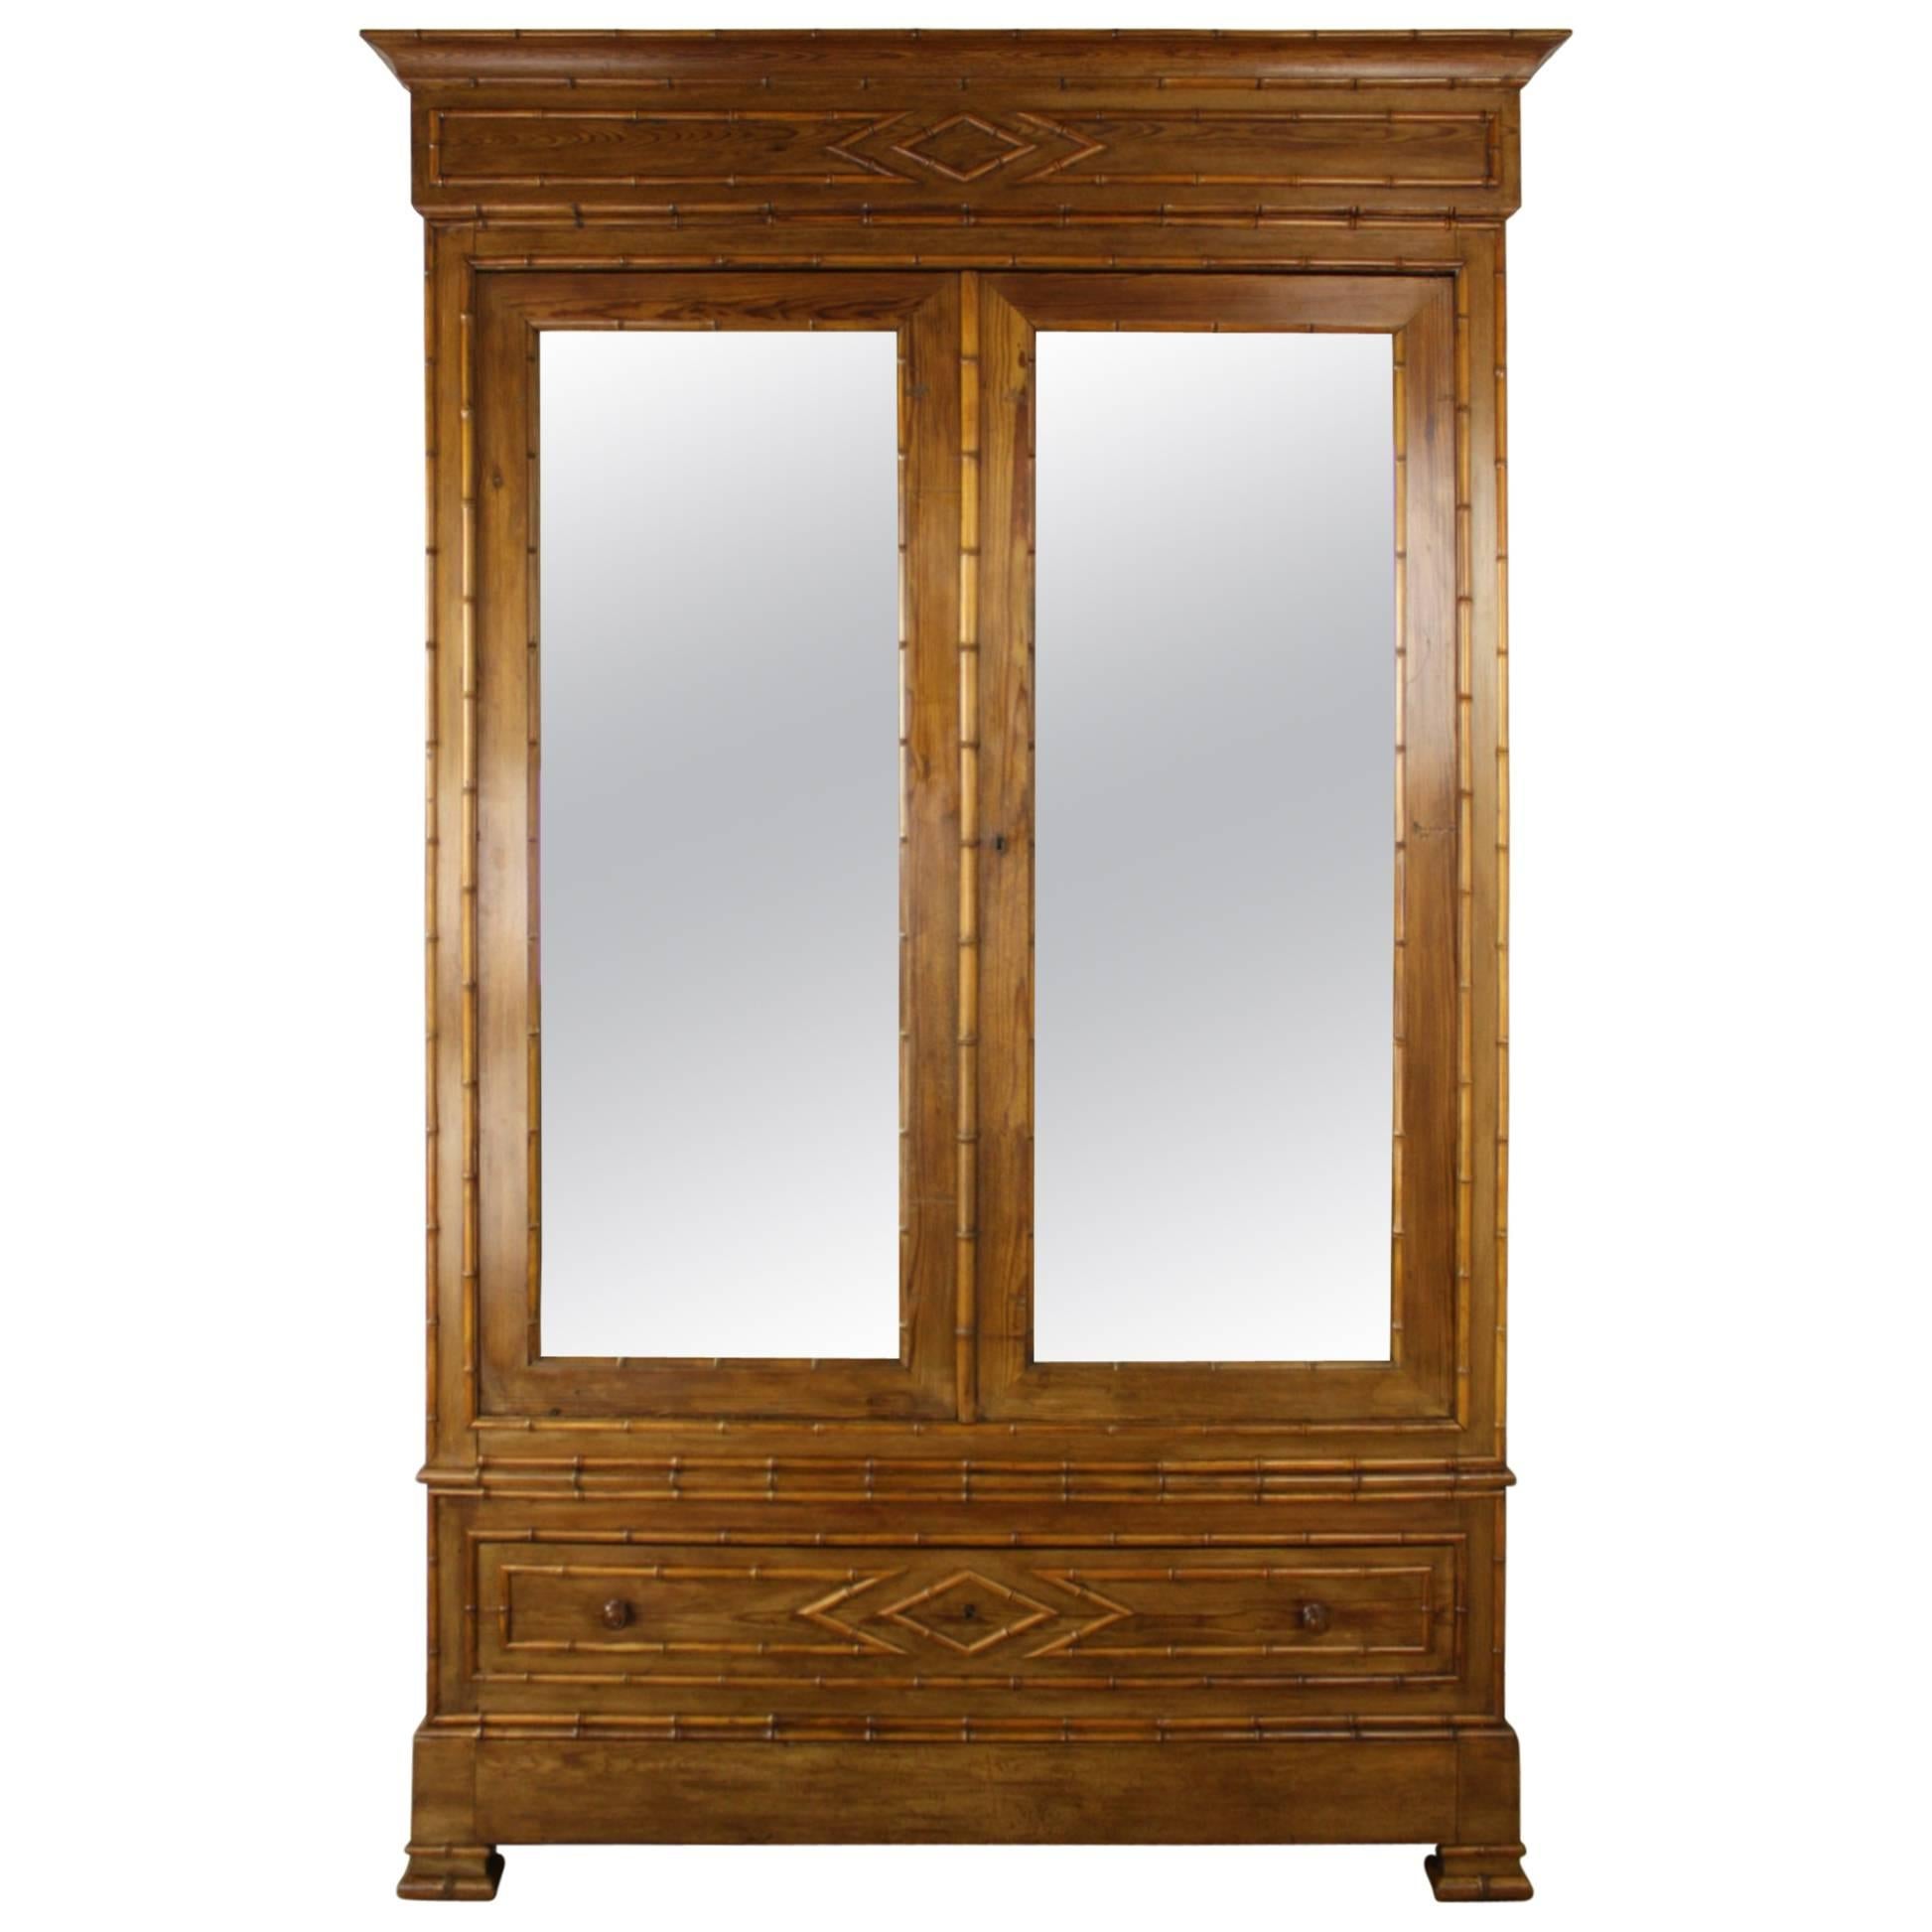 Antique English Faux Bamboo Armoire with Mirrored Doors